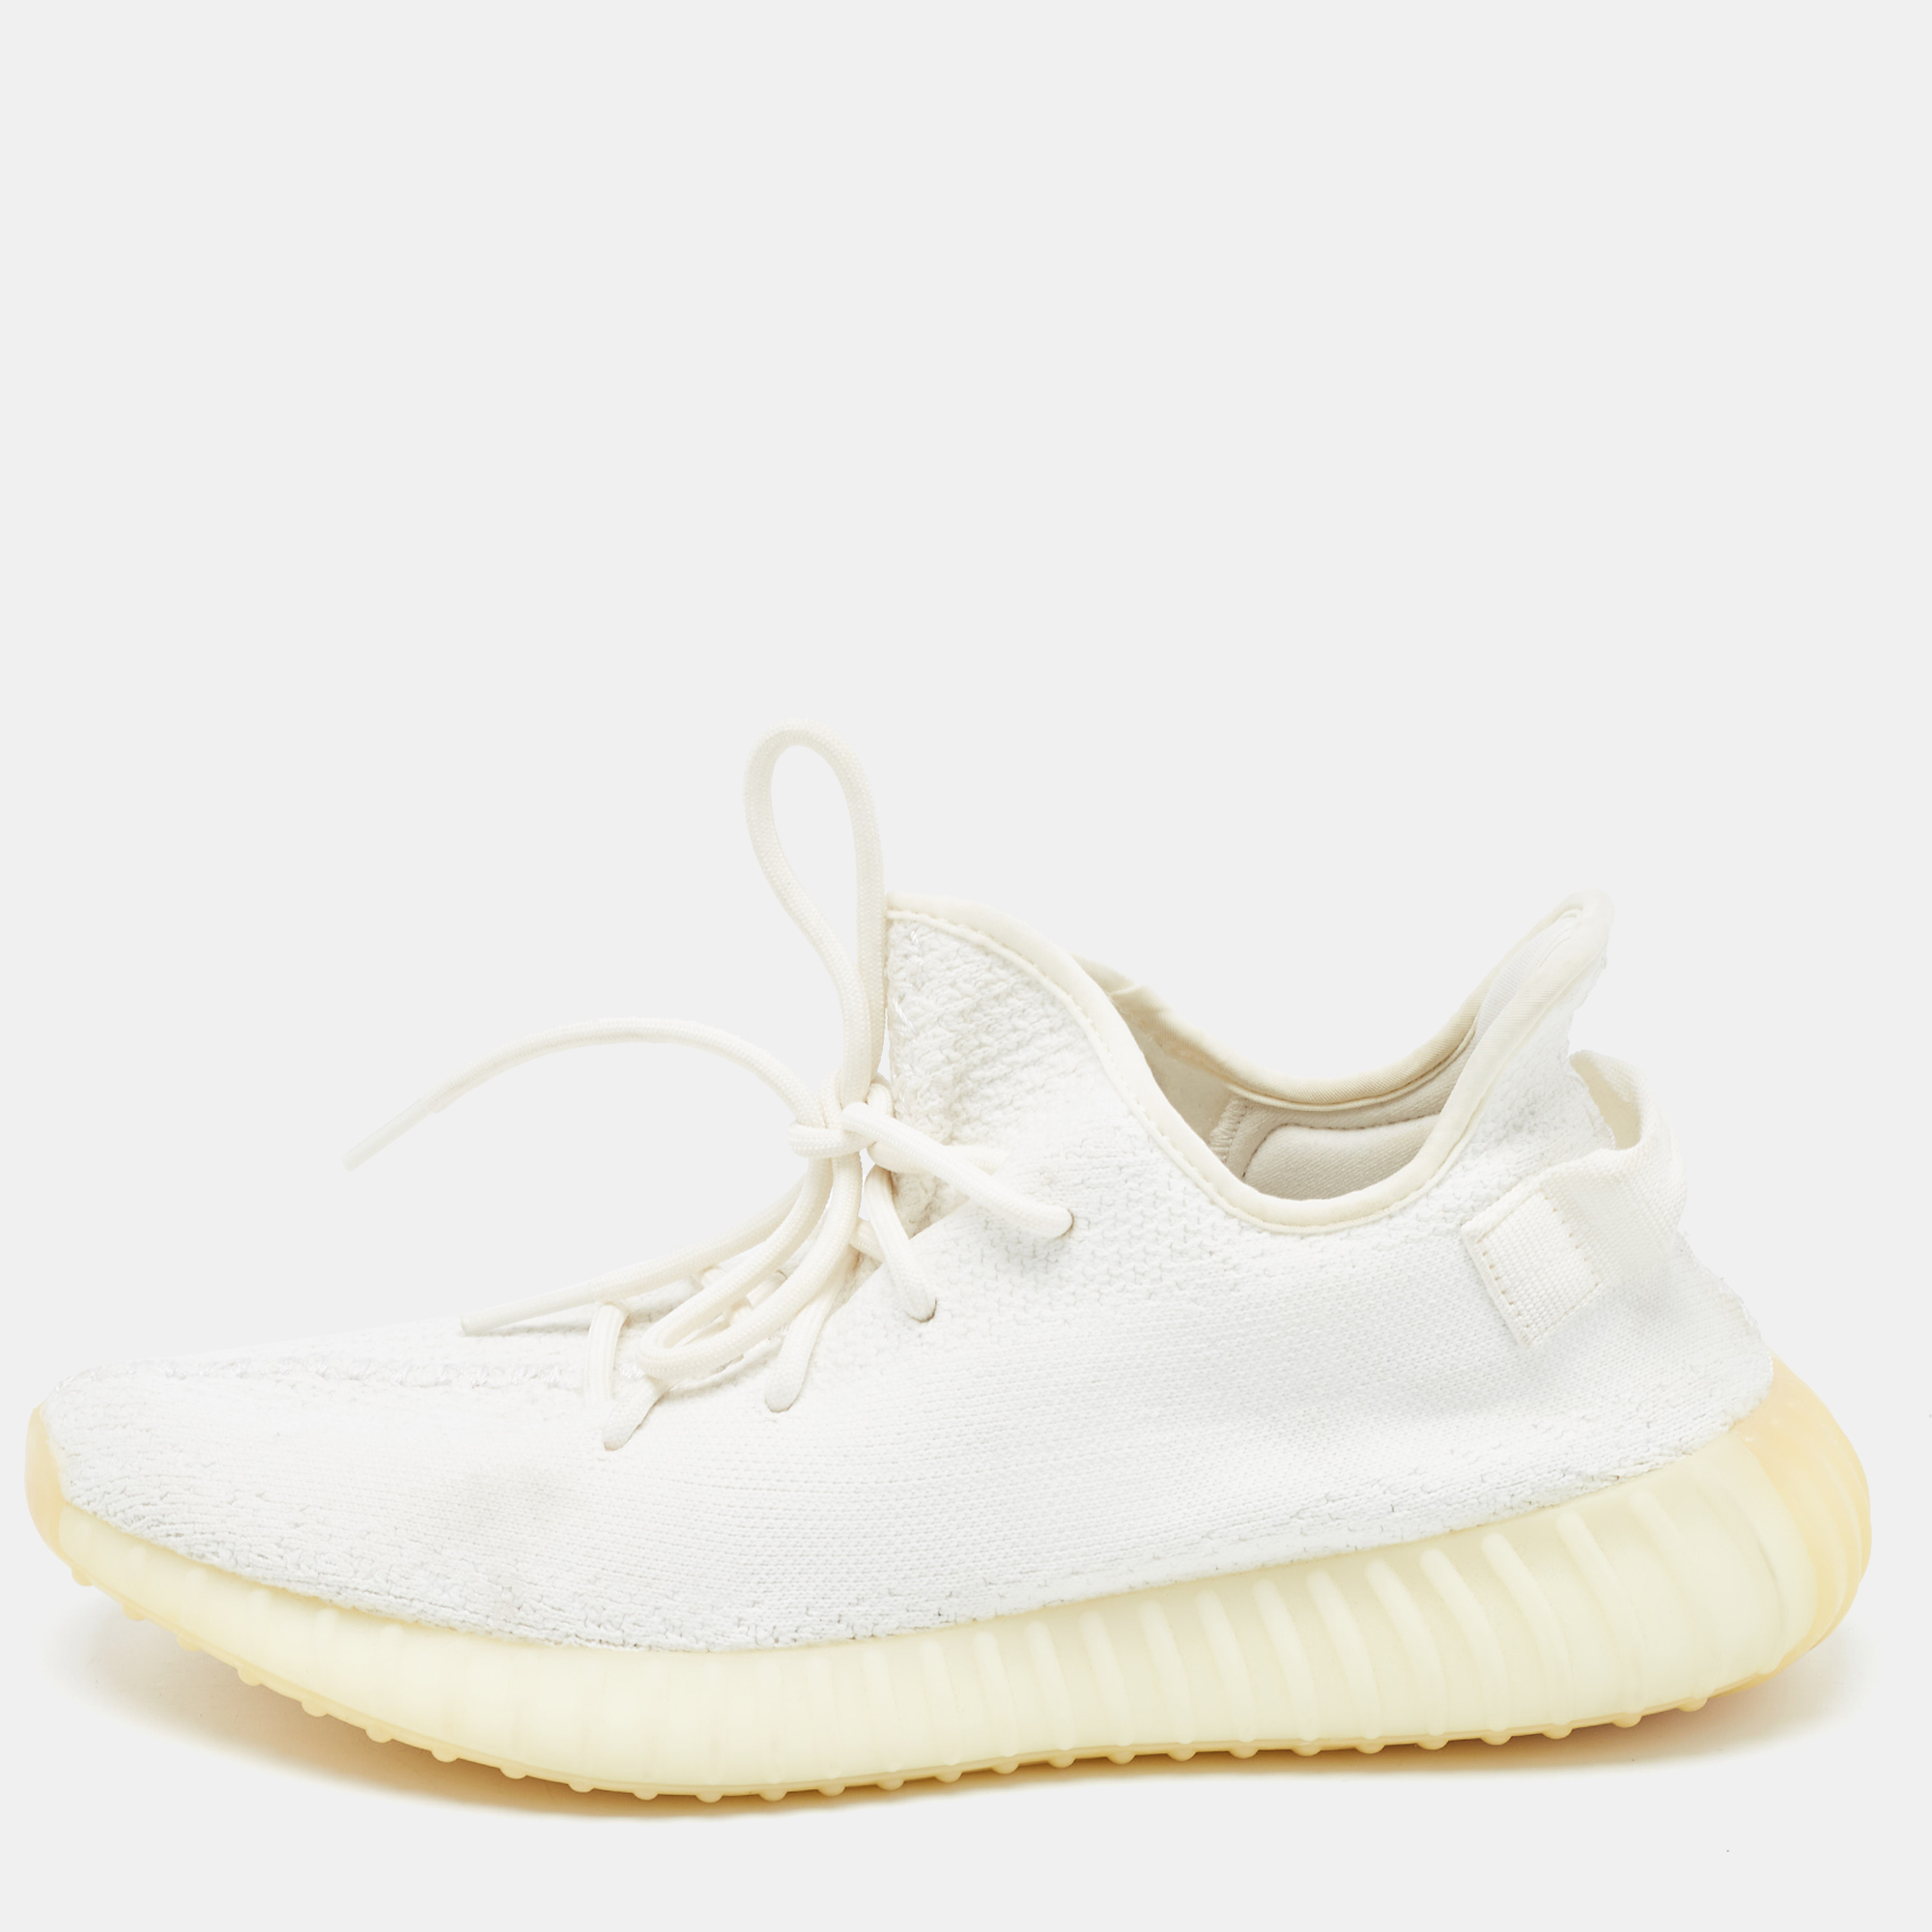 Yeezy X Adidas White Knit Fabric Boost 350 V2 Cream Sneakers Size 46 2/3